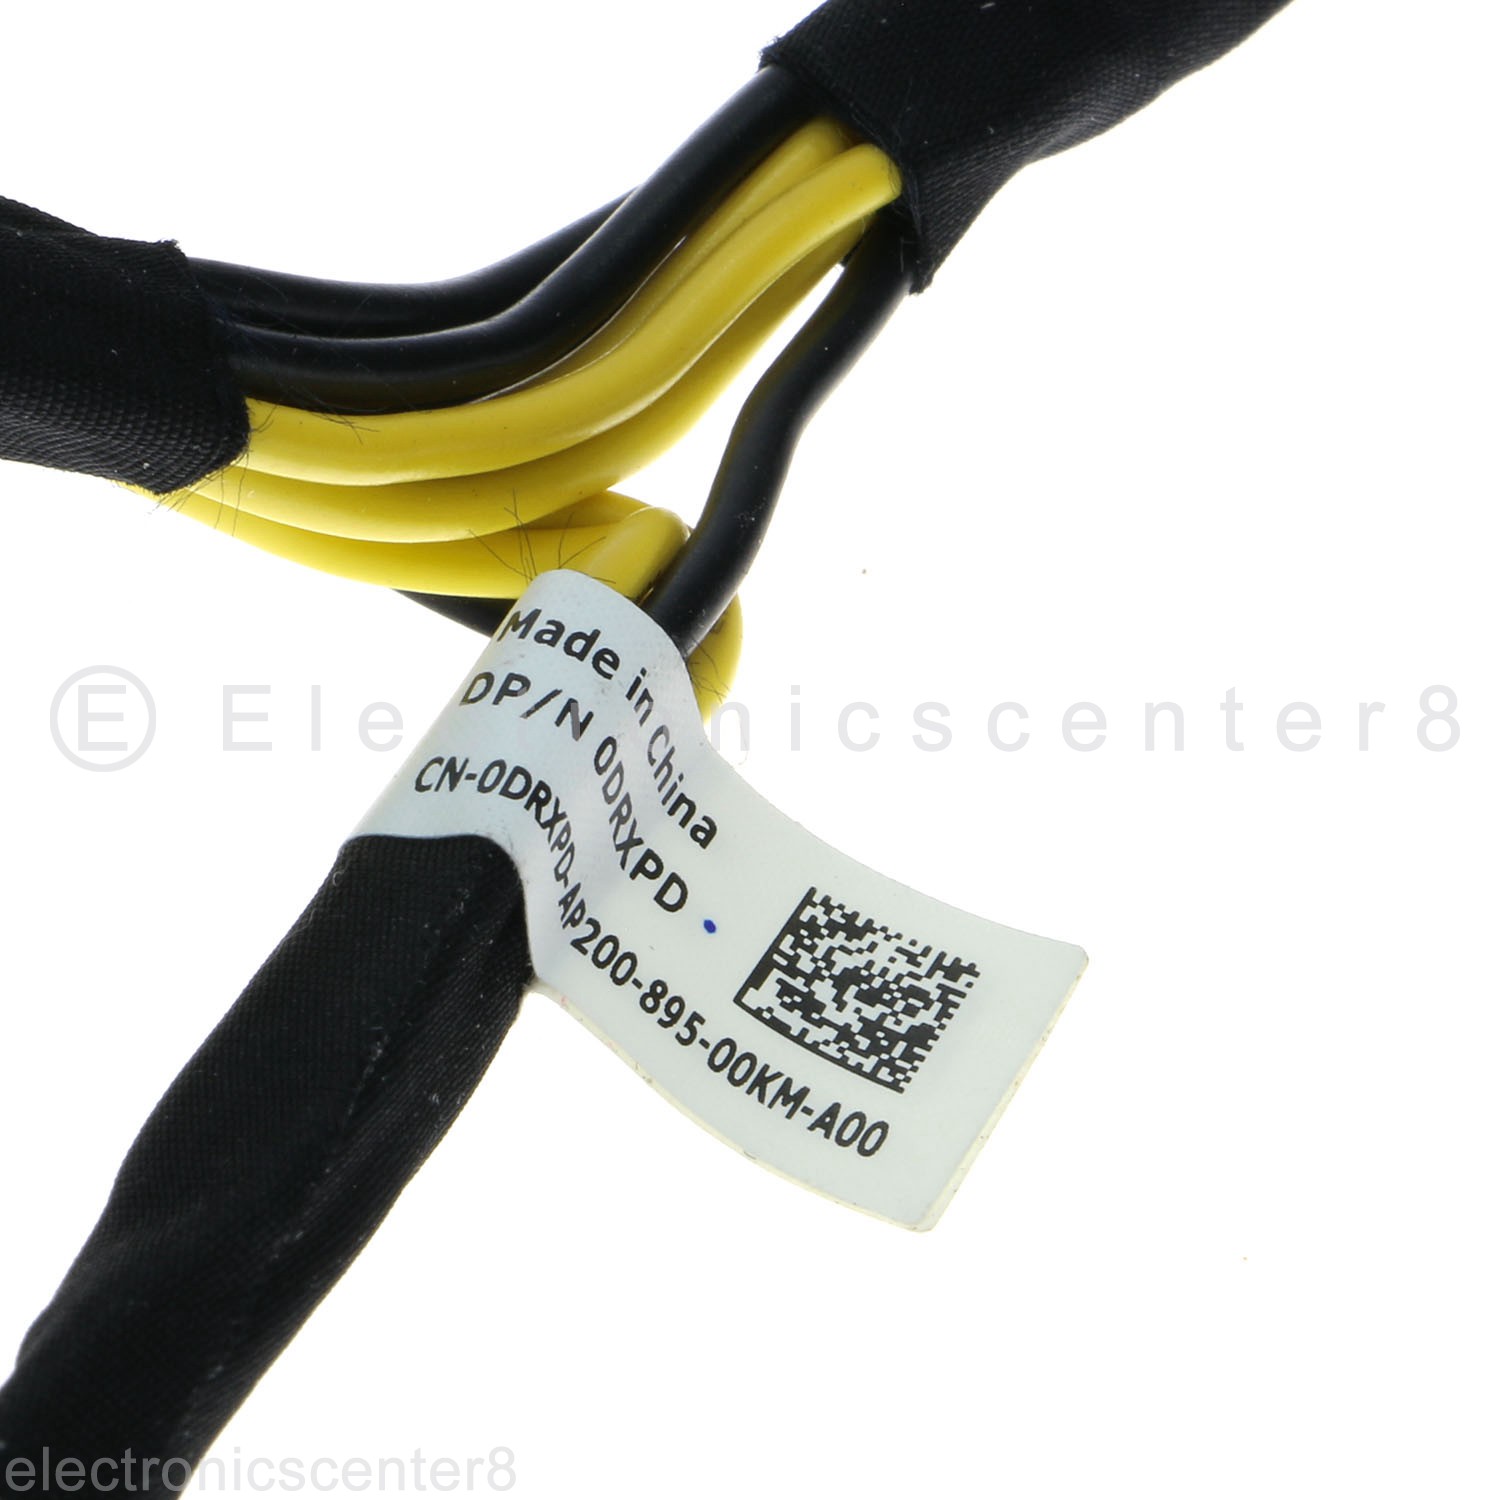 NEW Graphics Card GPU Power Cable For Dell T620 T630 T430 DRXPD 0DRXPD